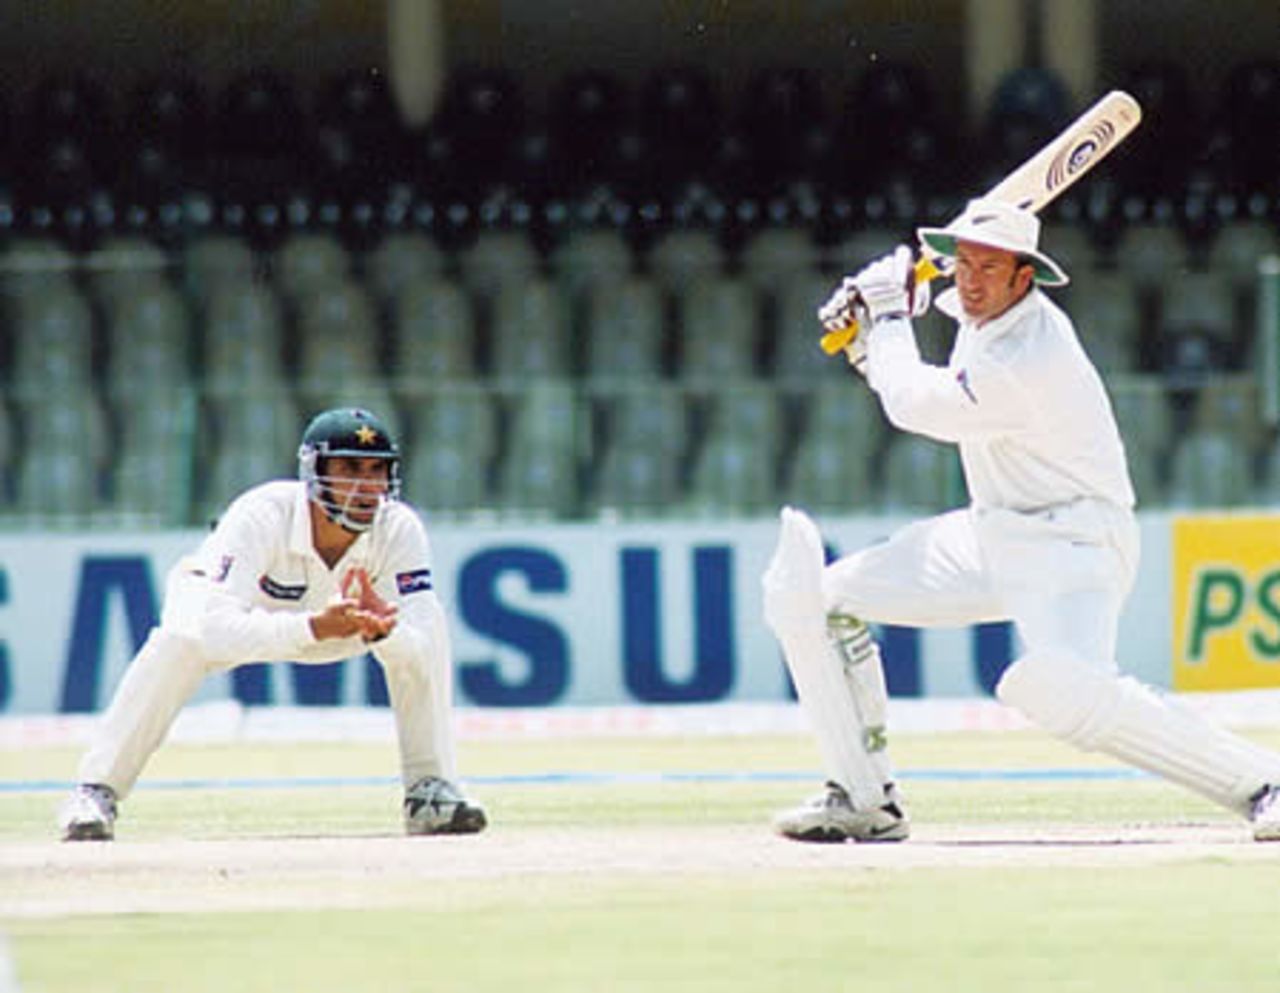 Chris Harris drives into the covers as Abdul Razzaq looks on - New Zealand second innings, day 3, 1st Test, New Zealand v Pakistan, Gaddafi Stadium Lahore, 3 May 2002